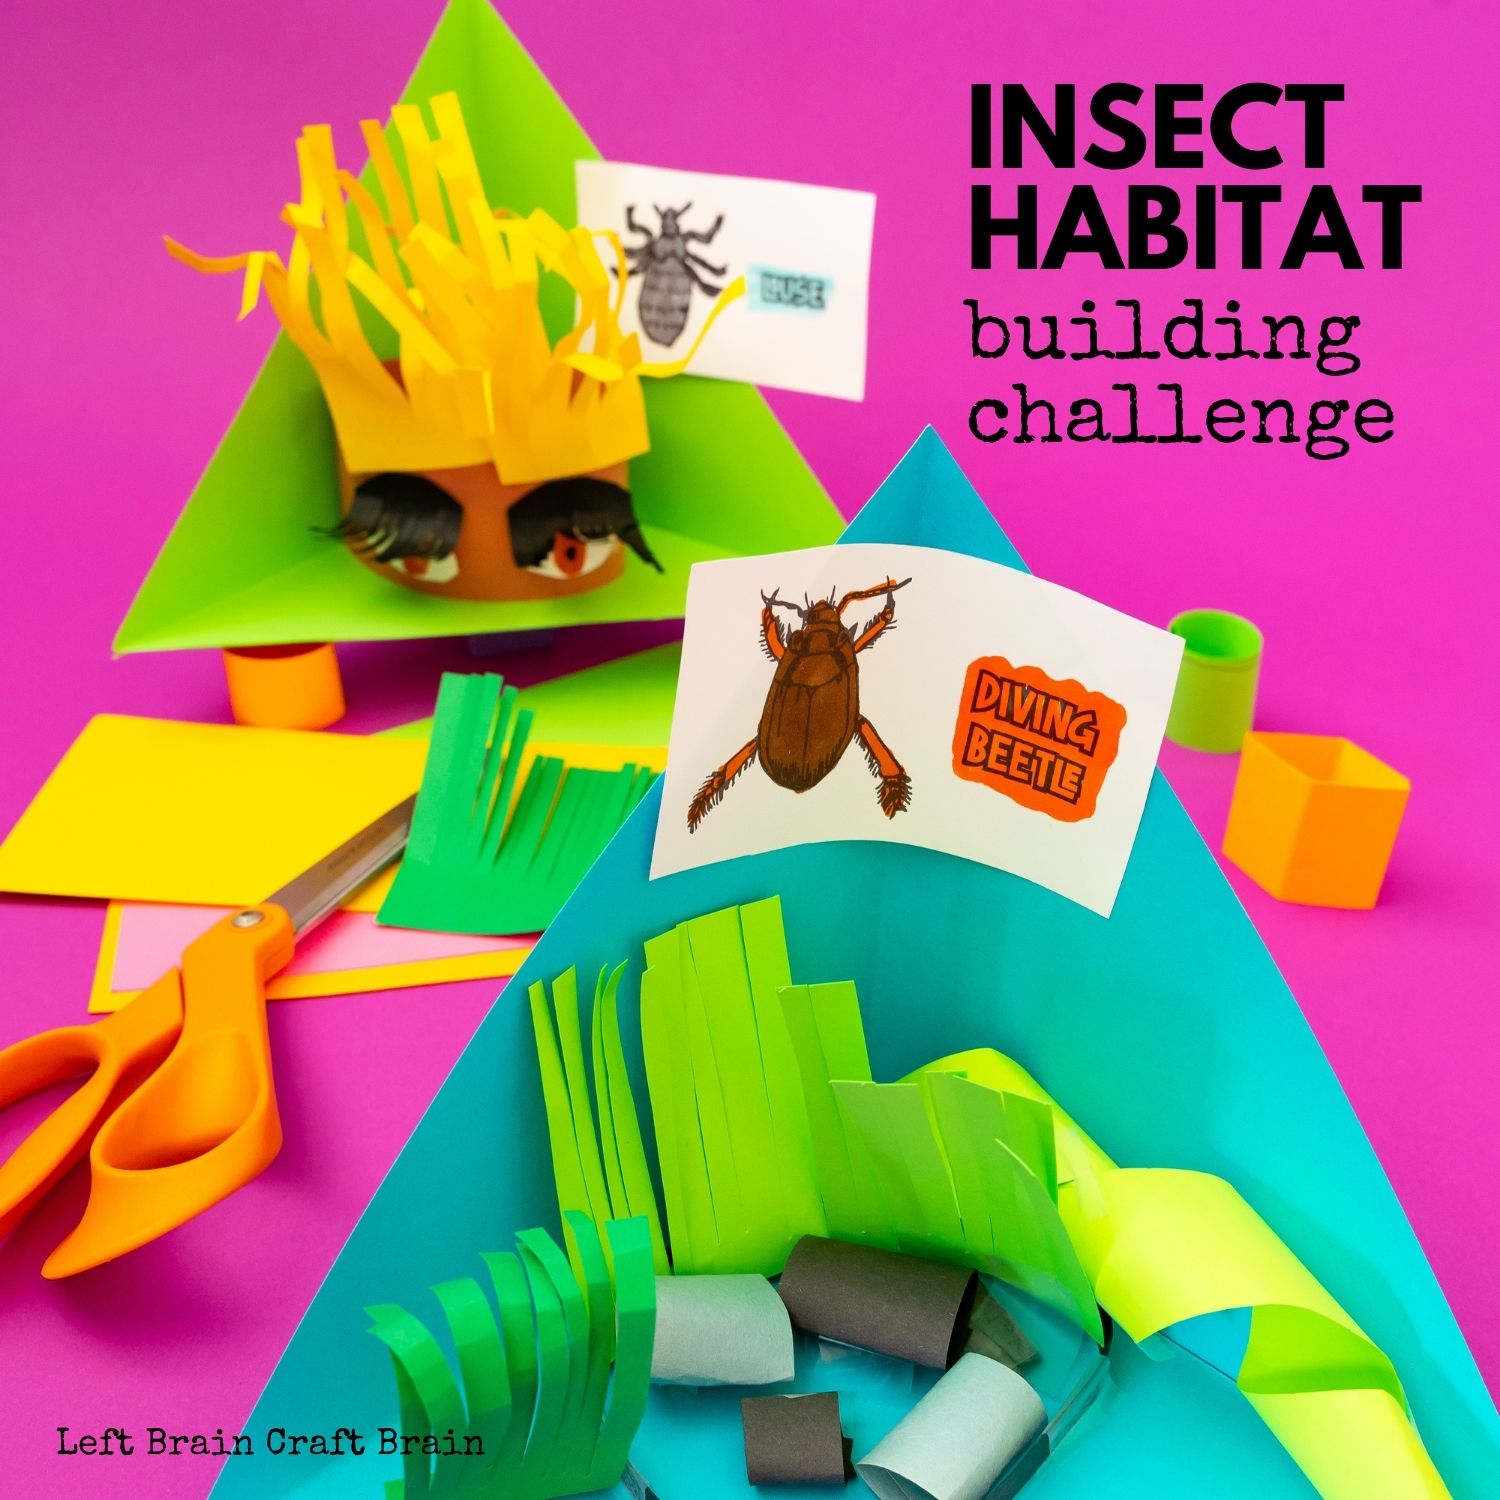 This Insect Habitat Building Challenge helps kids learn about animal habitats and build fine-motor skills with fun paper cutting techniques. It's budget-friendly STEAM fun!